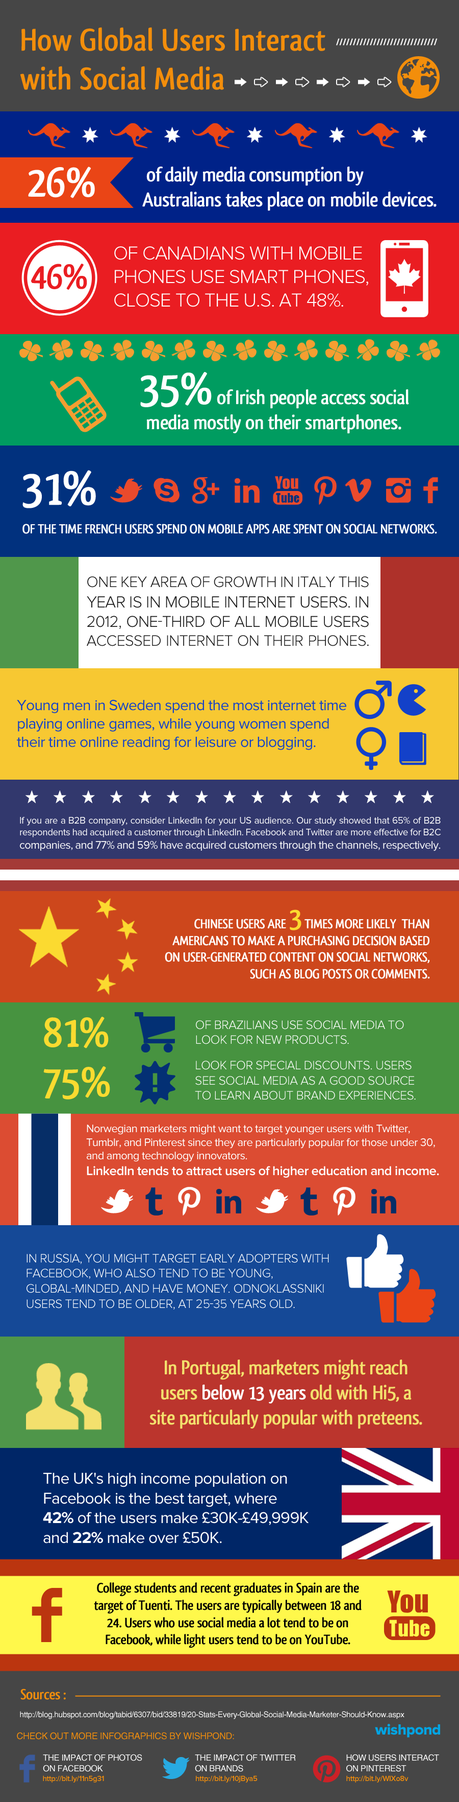 [Infographic] How Global Users Interact with Social Media